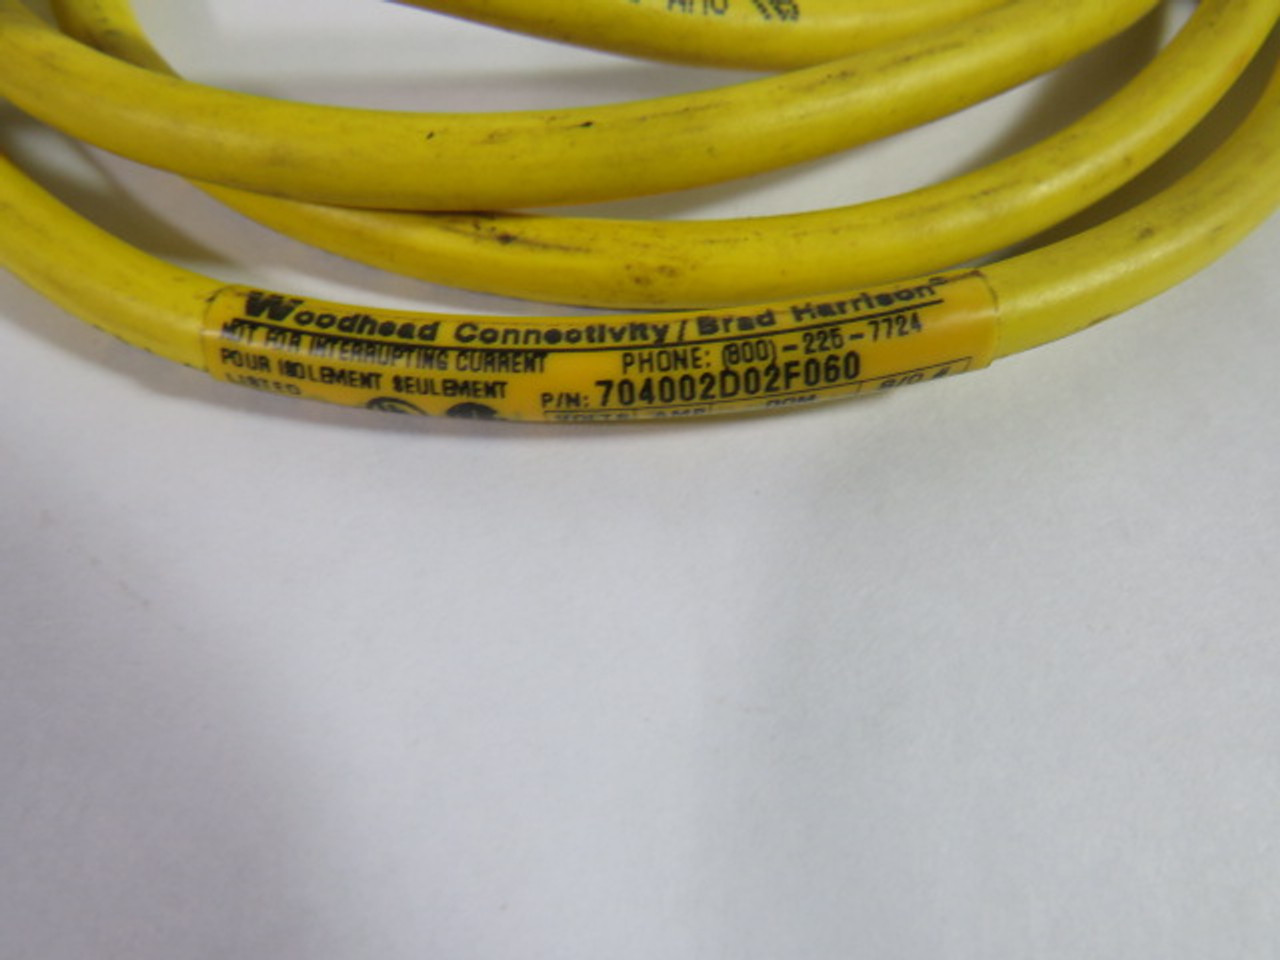 Brad Harrison 704002D02F060 4-P 250V 4A Cable USED